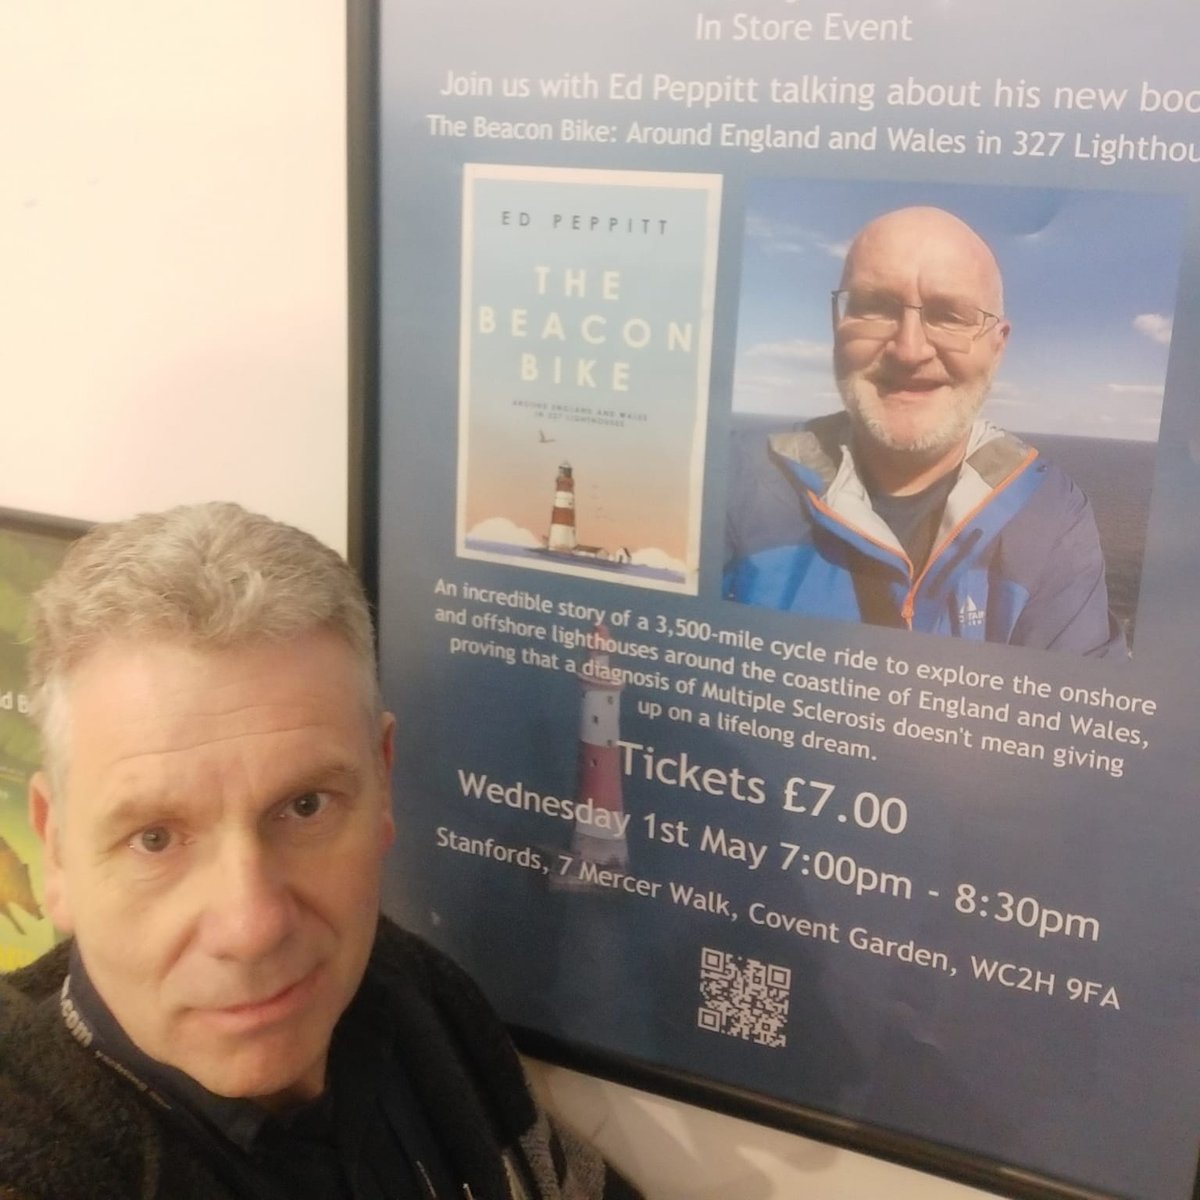 My lovely friend Martin has just put up the poster about my talk at Stanfords next week. It's almost as exciting as the publication of the book itself! @StanfordsTravel @iconbooks @CullandCoAgency